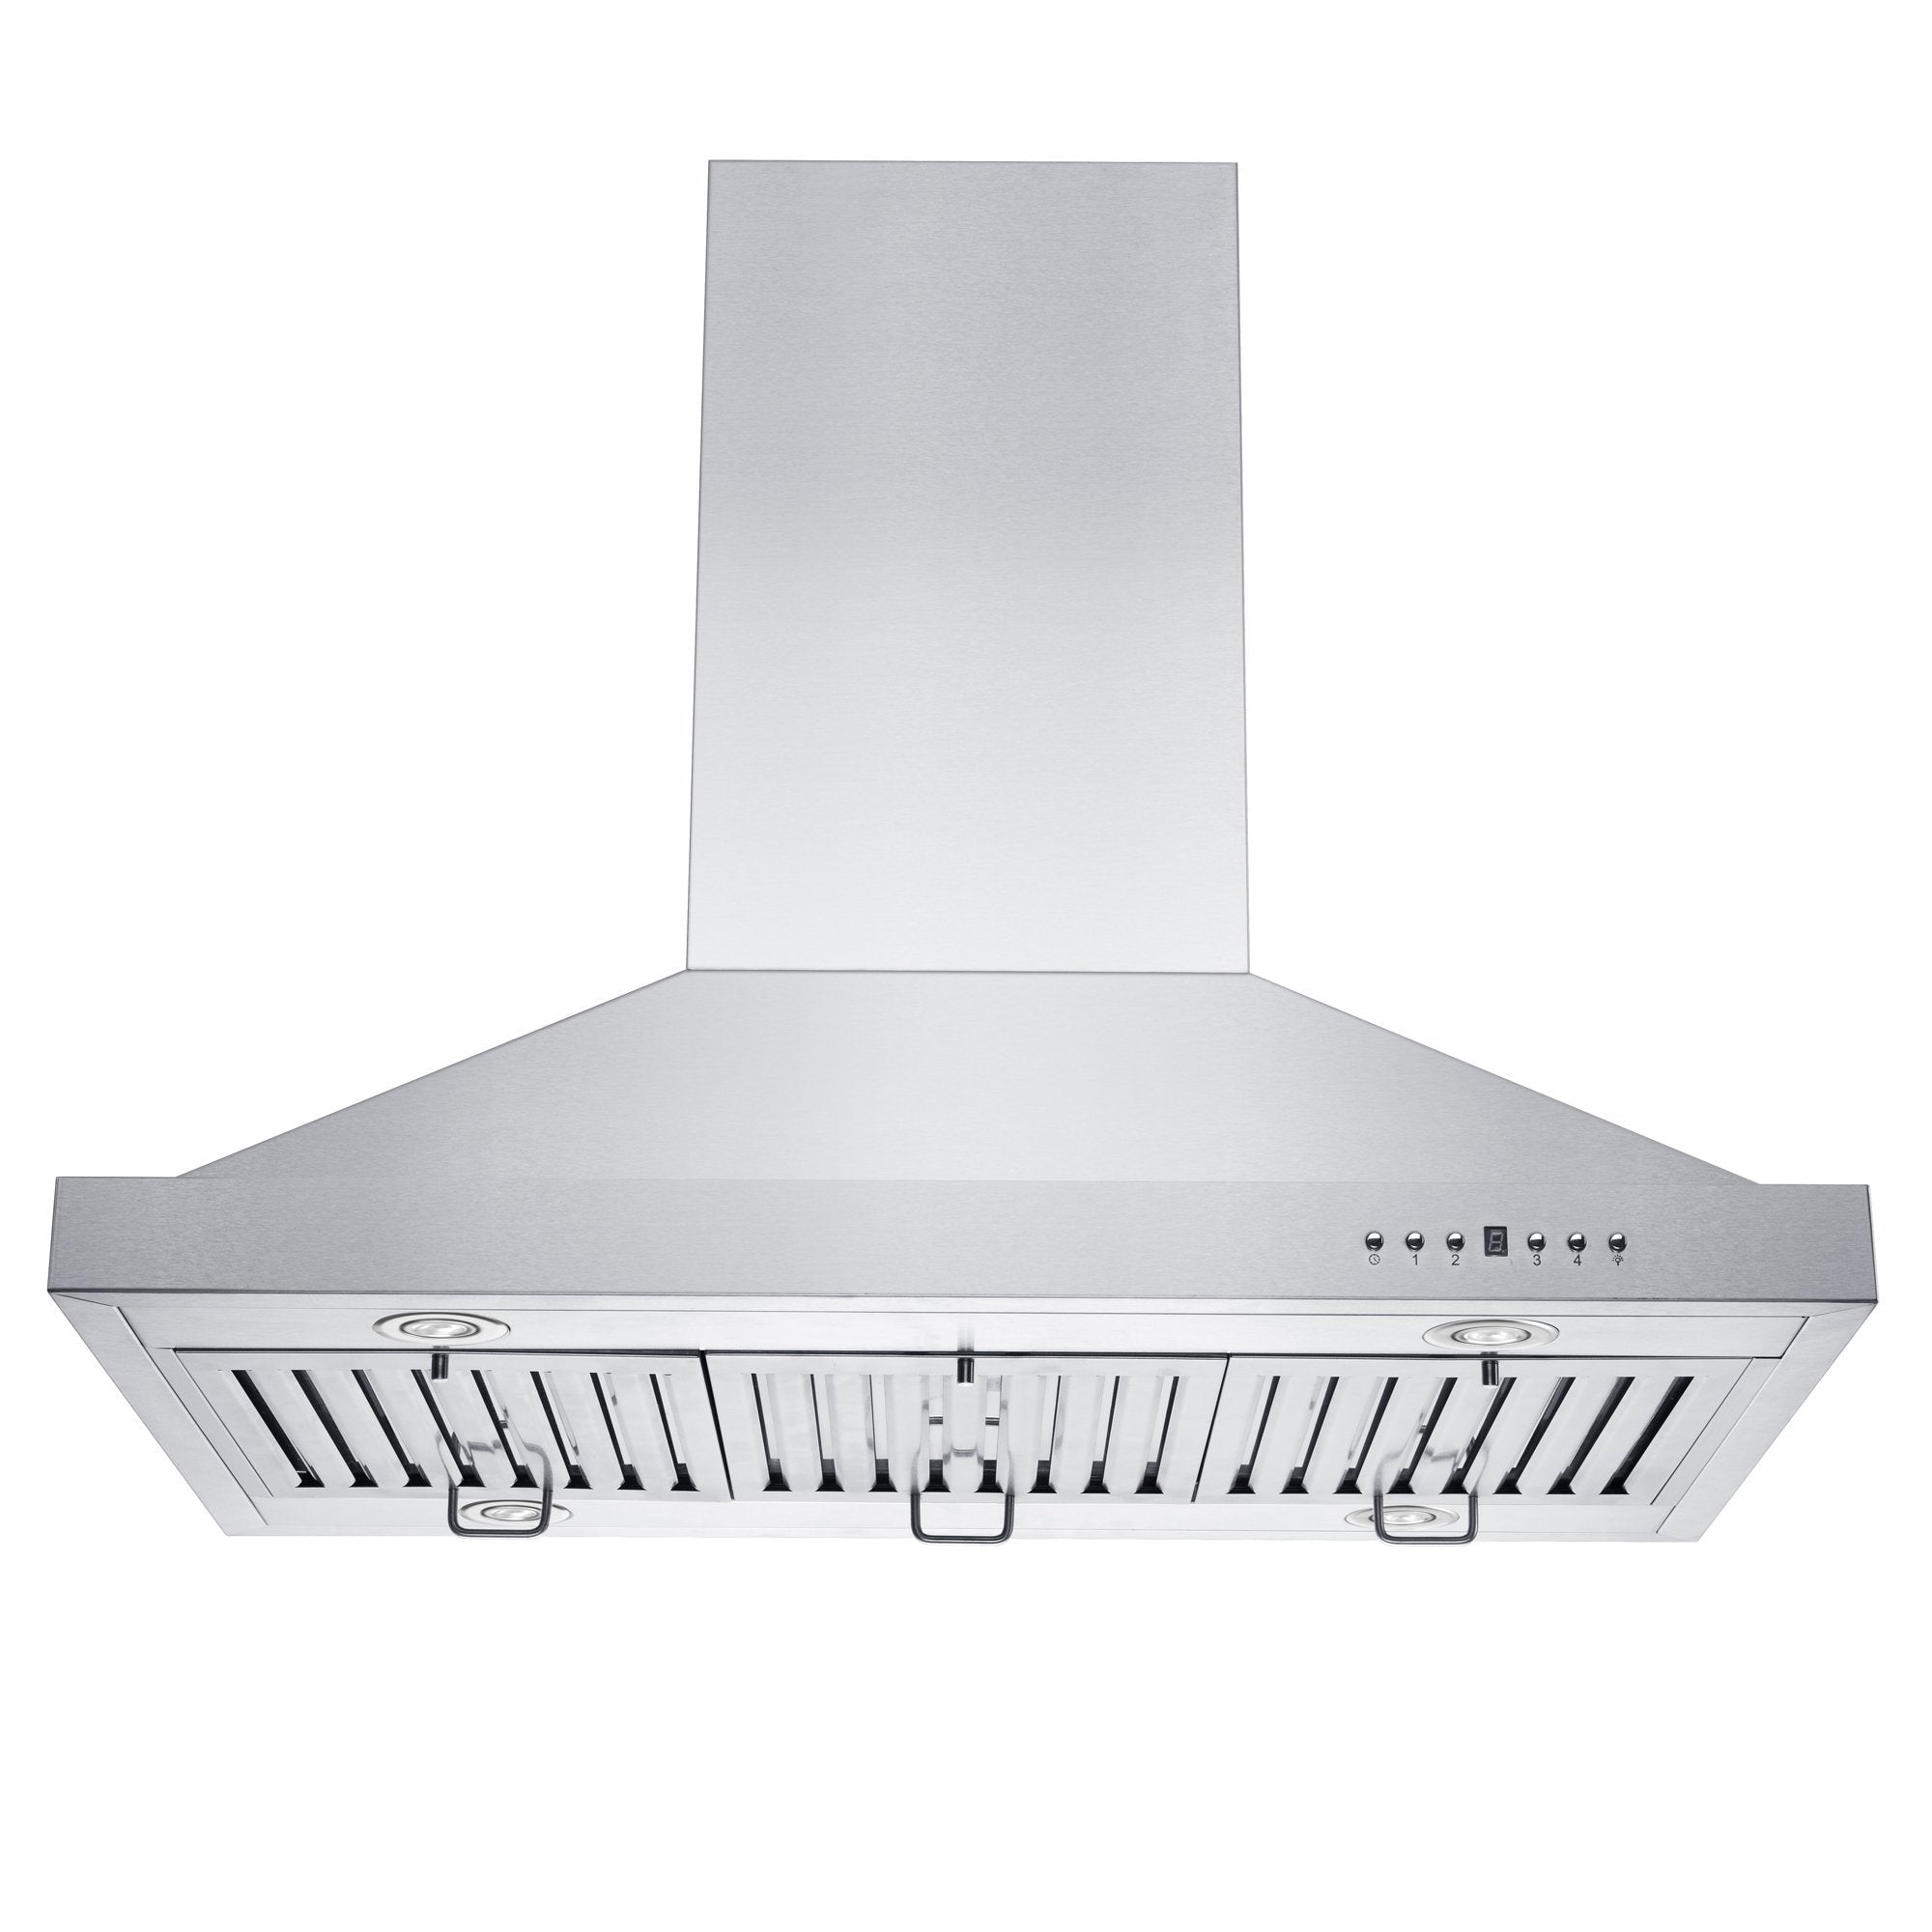 36" Ducted Island Mount Range Hood with Dual Remote Blower in Stainless Steel (GL2i-RD-36)